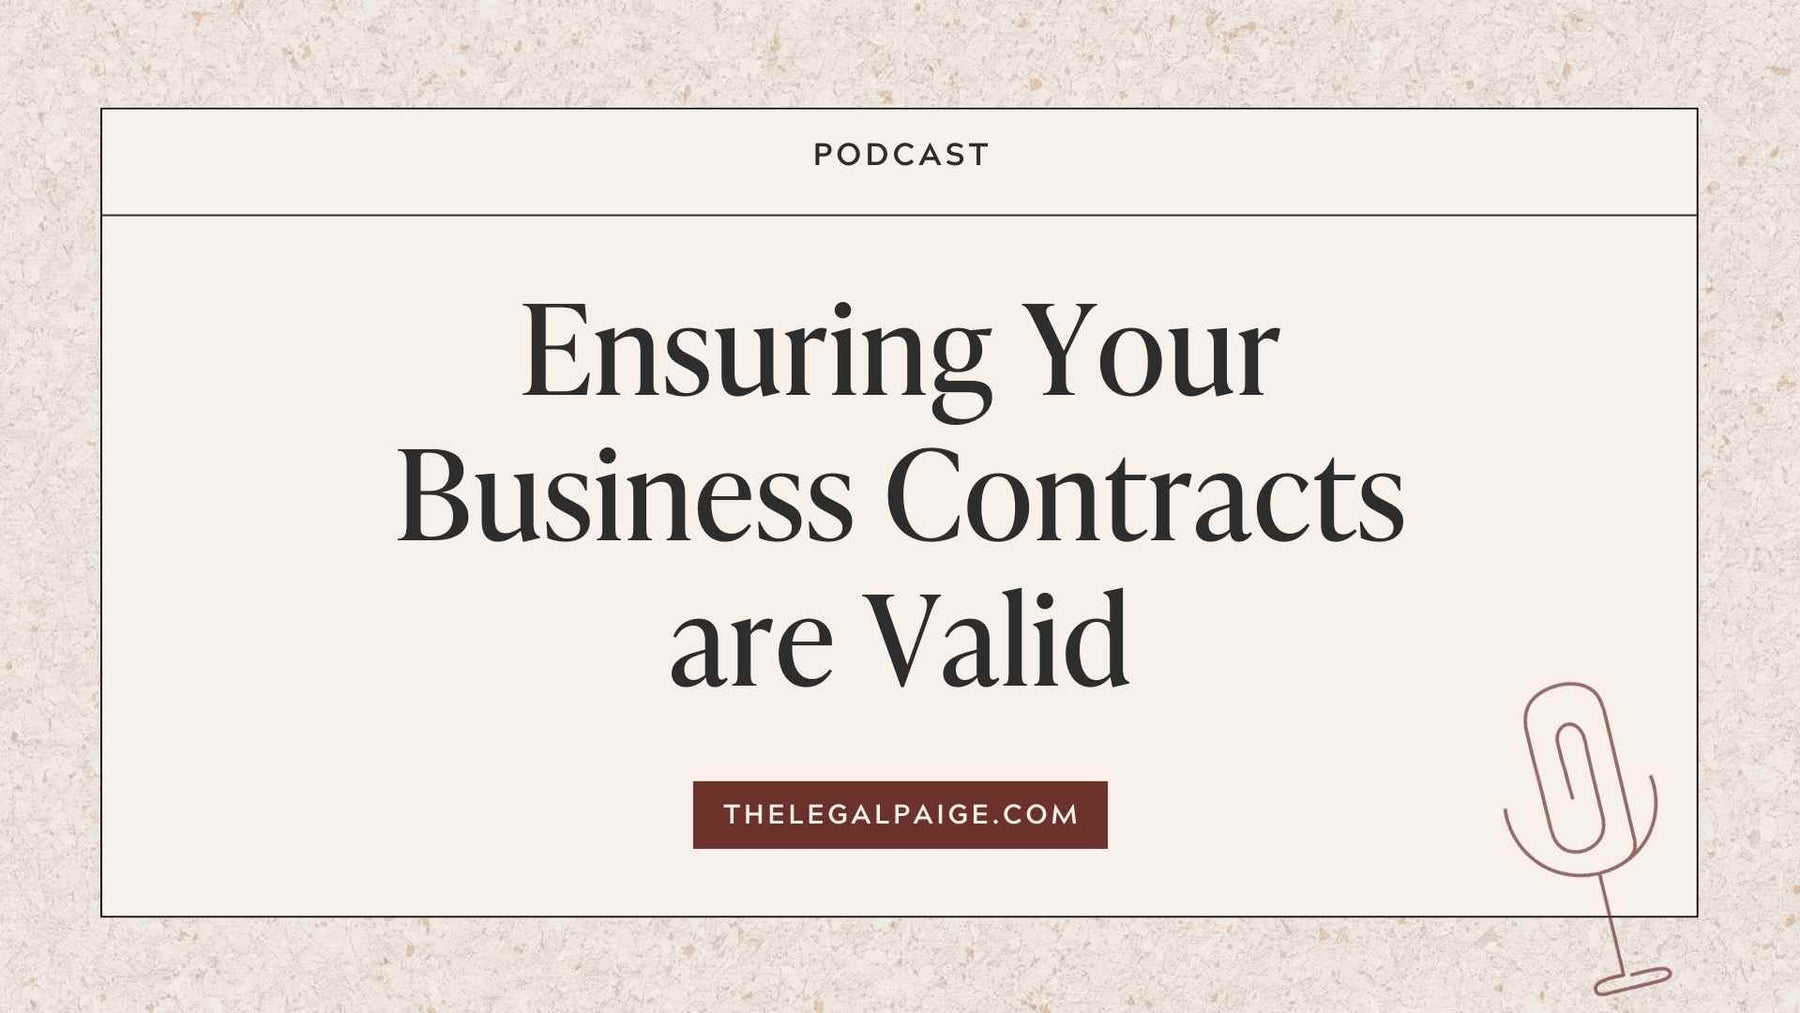 Episode 25: Ensuring Your Business Contracts are Valid